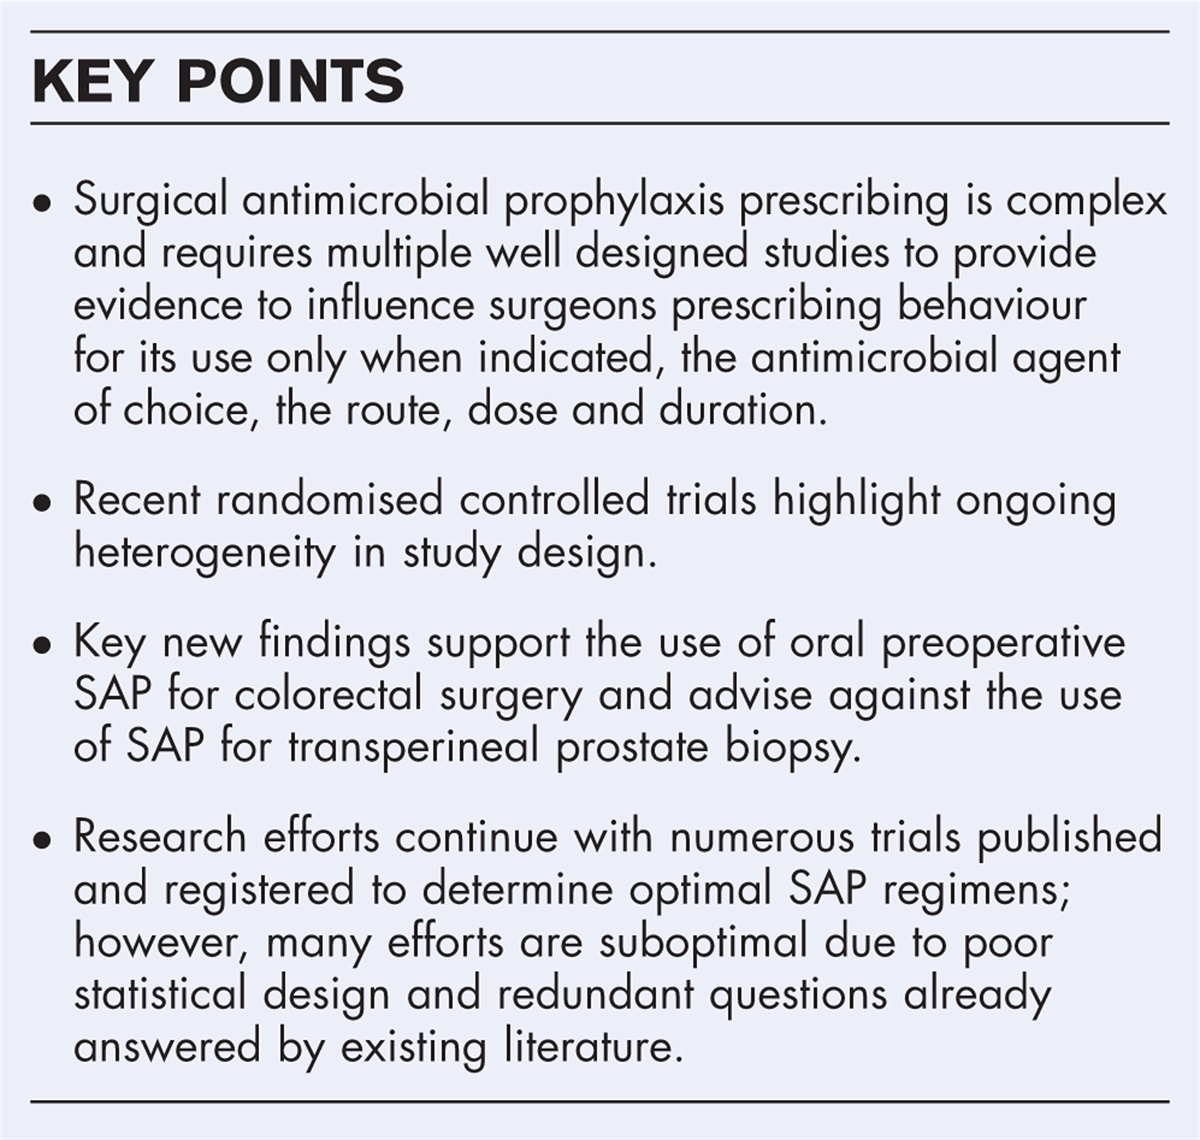 Surgical site infection prophylaxis: what have we learned and are we making progress?